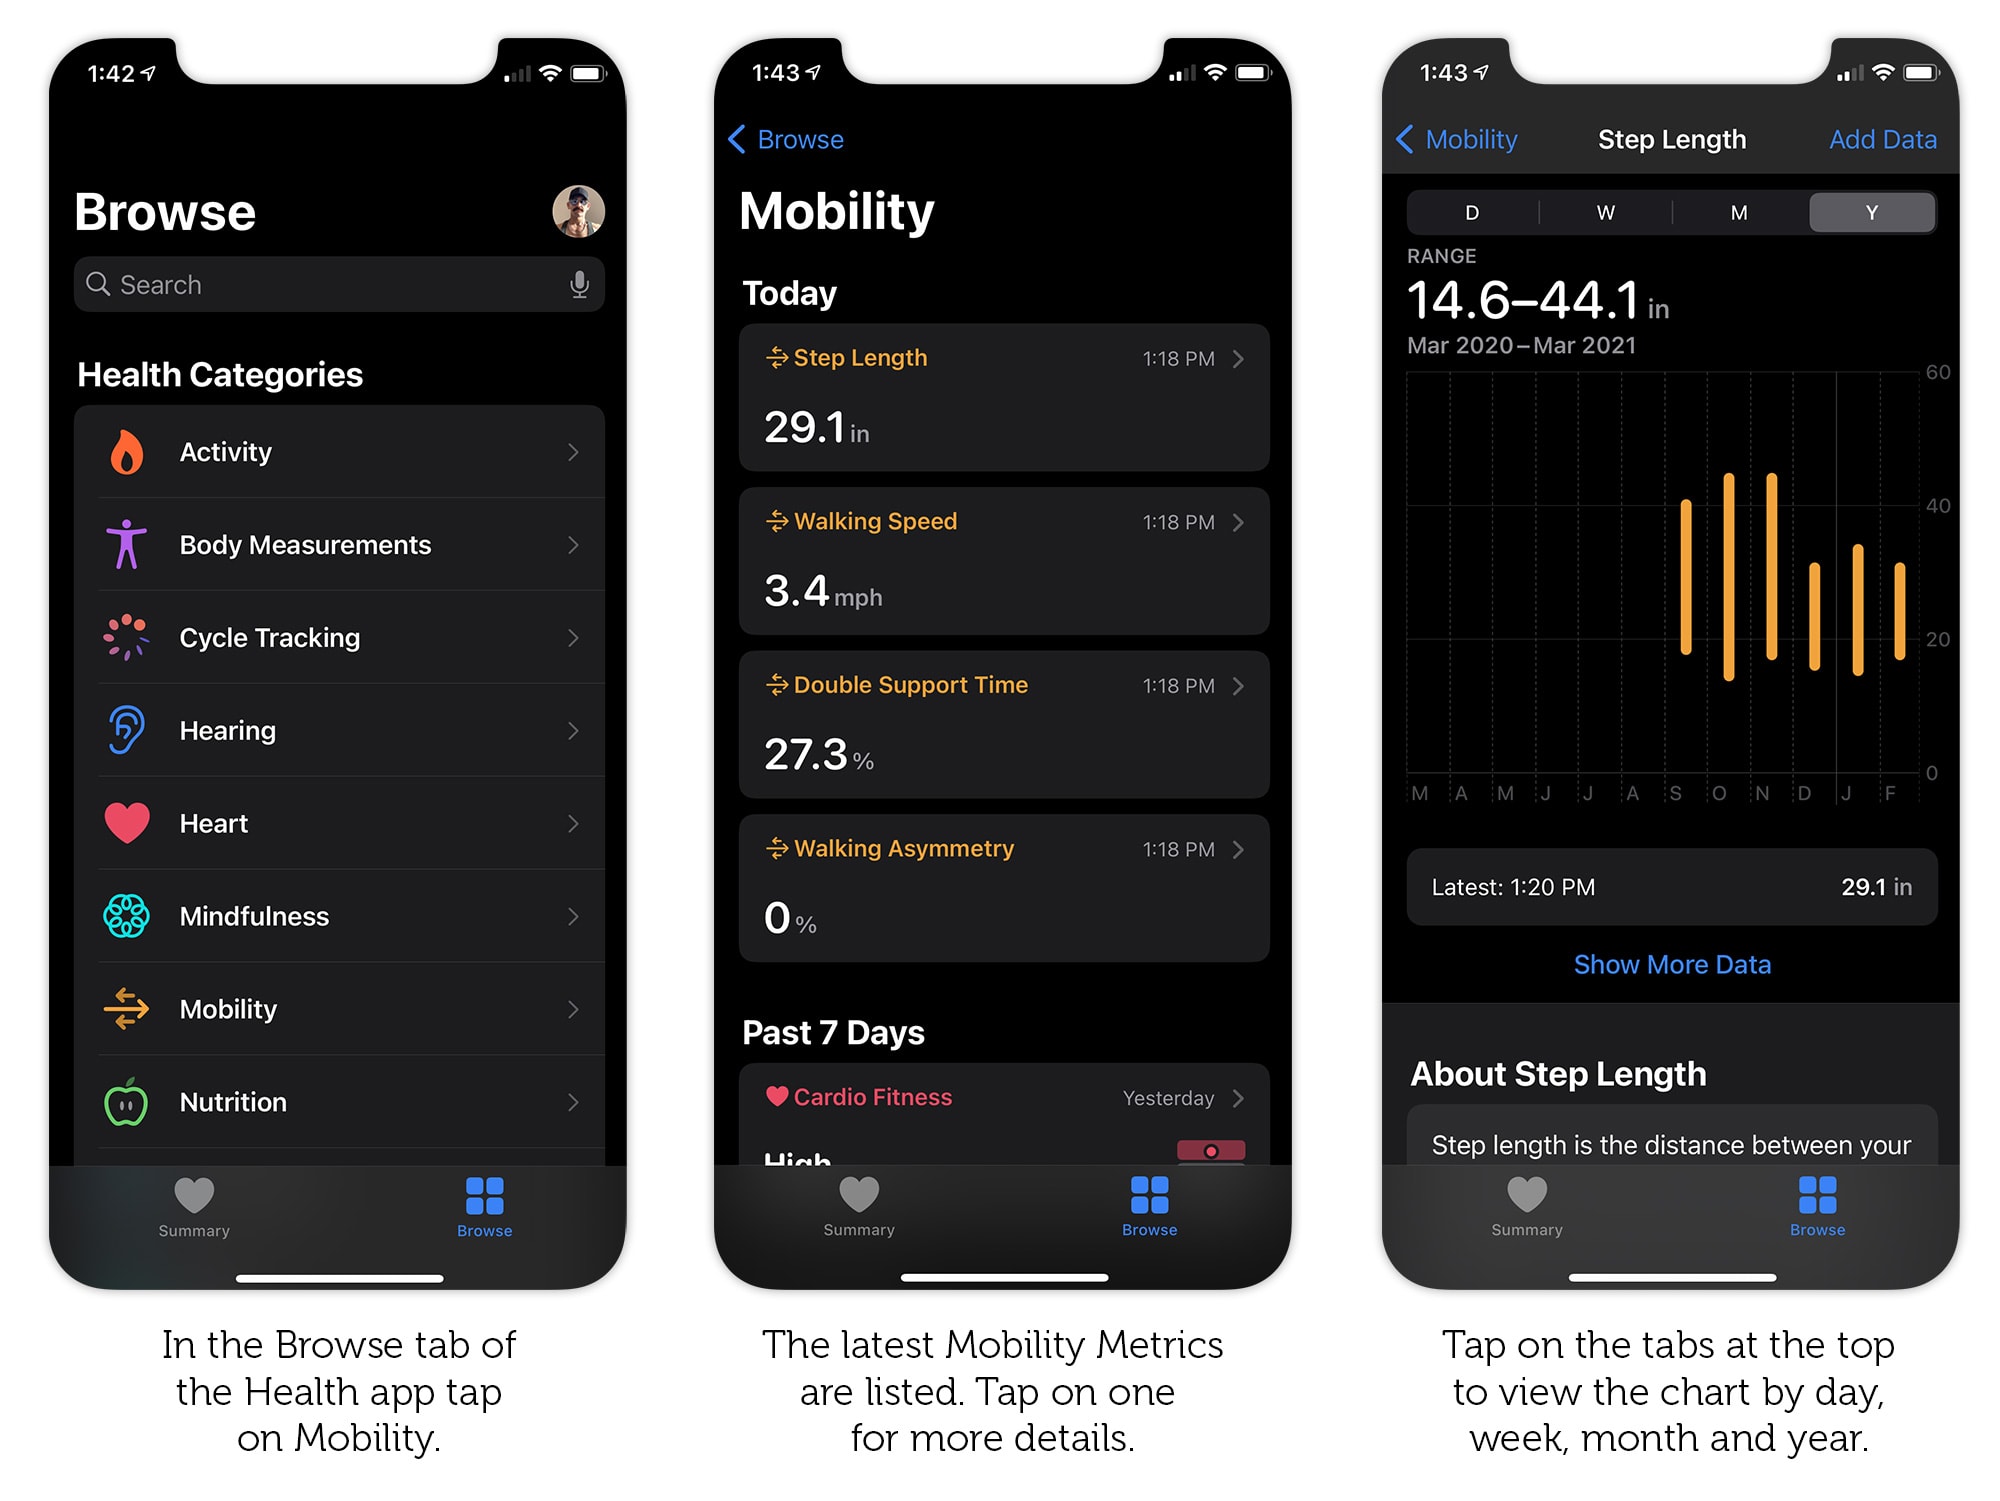 How to view your Mobility Metrics on iPhone in iOS 14.